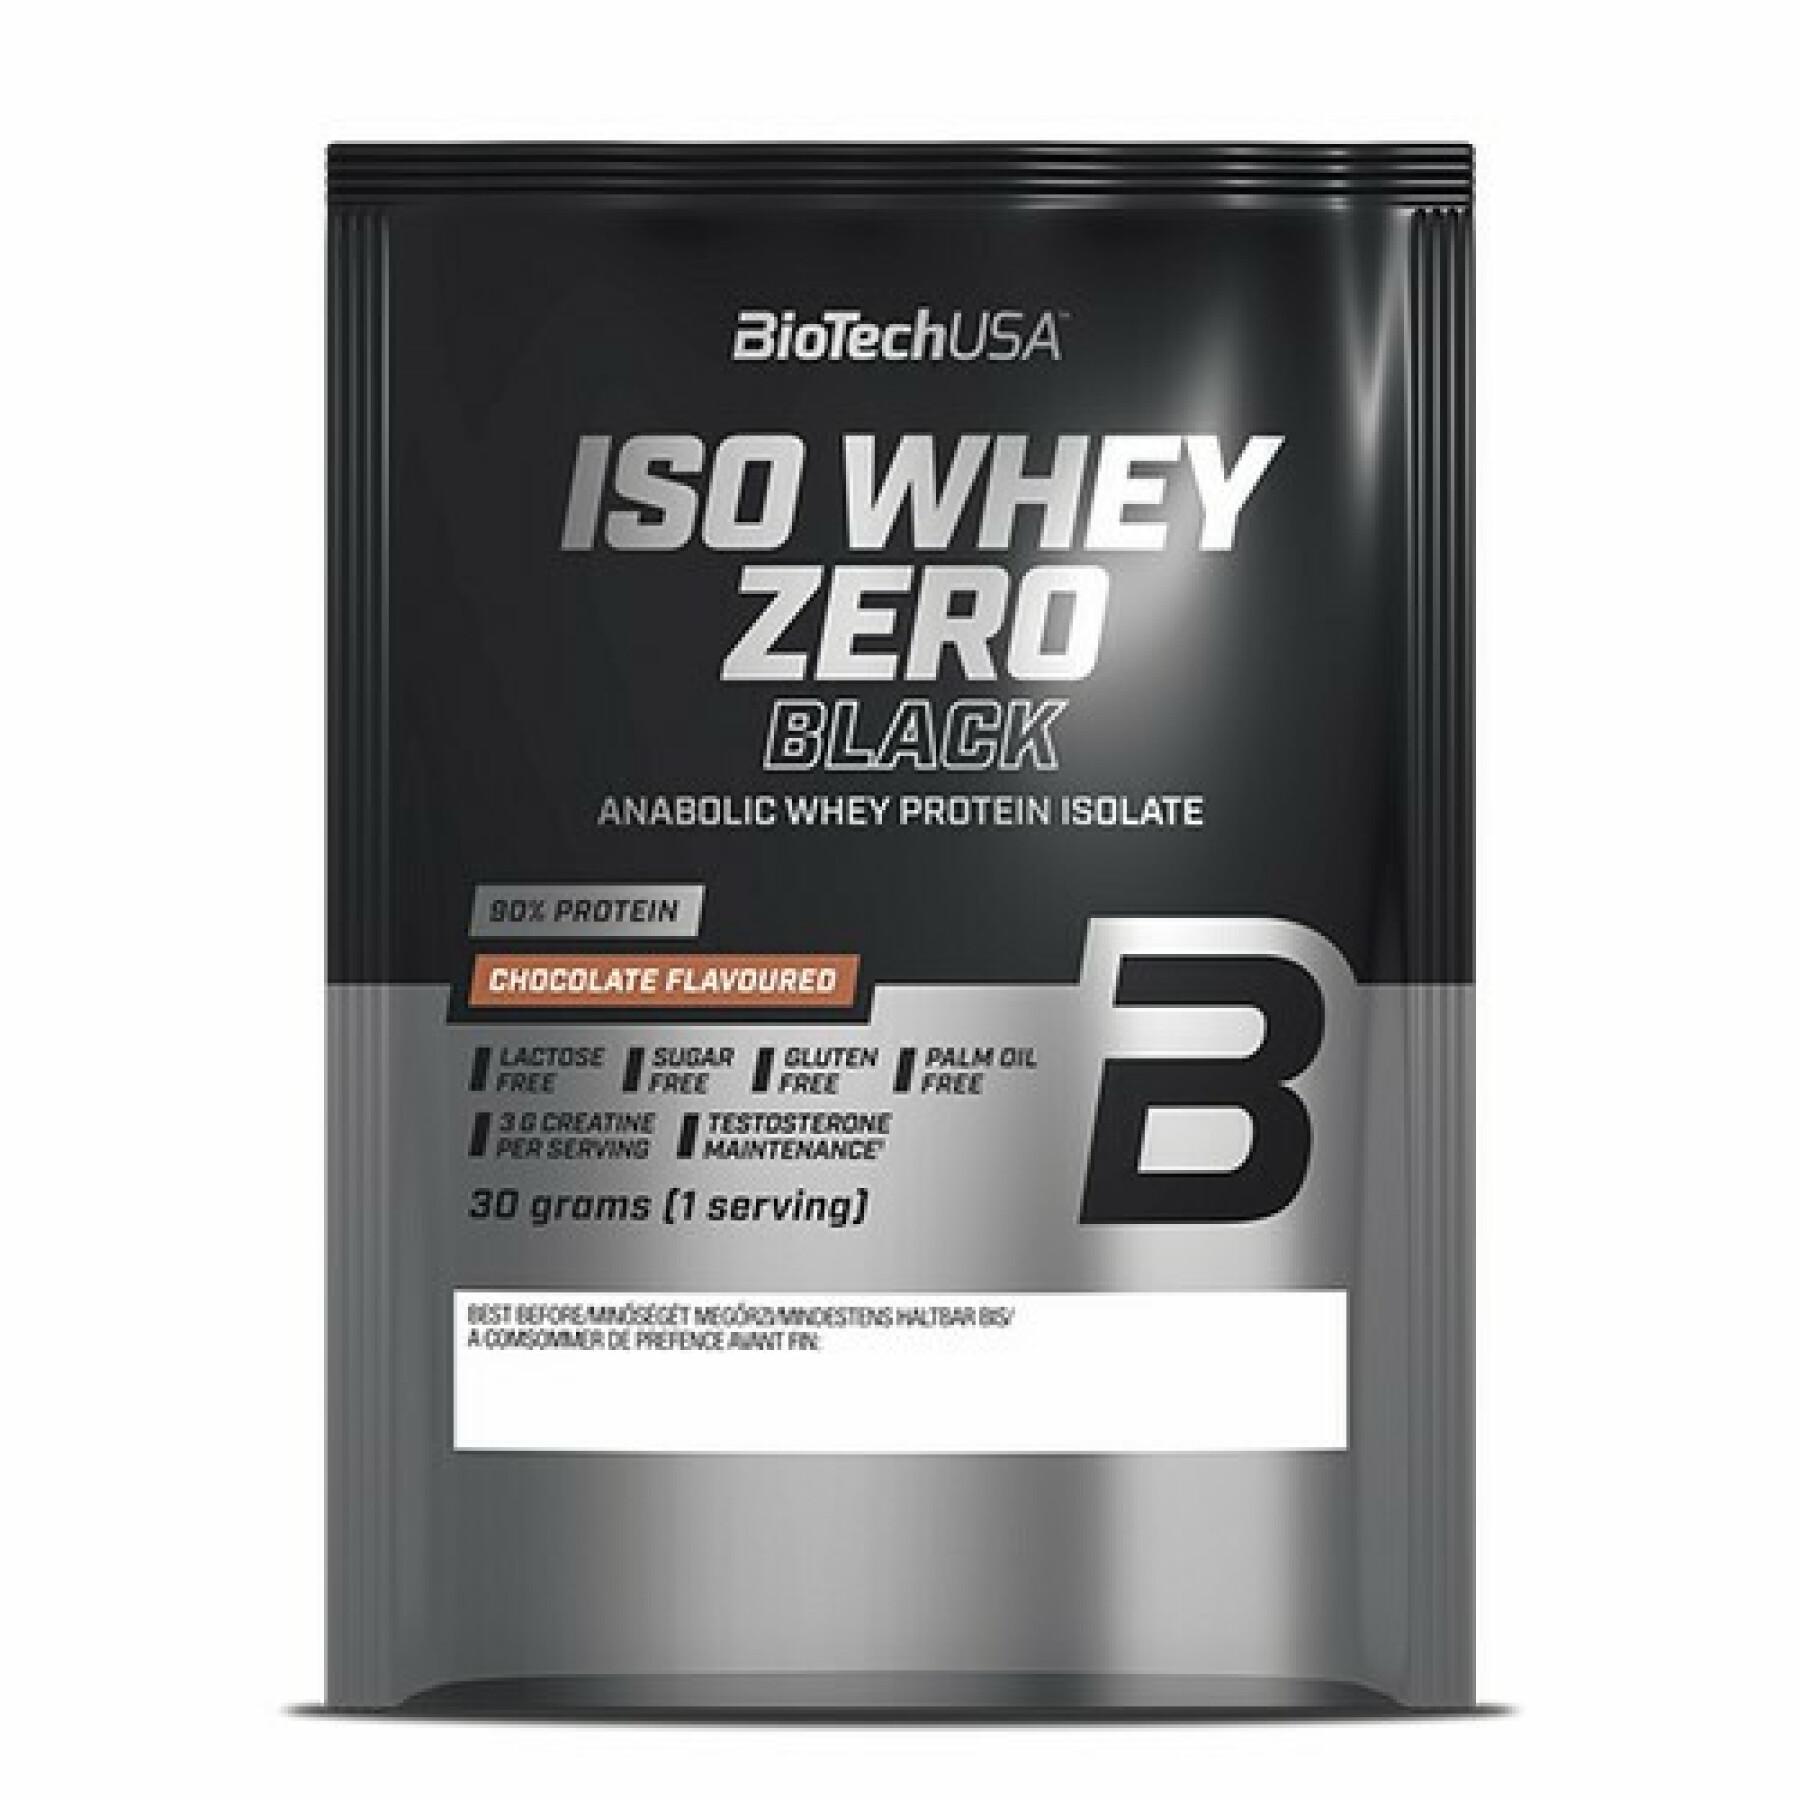 Batch of 50 bags of proteins Biotech USA iso whey zero - Chocolate - 30g